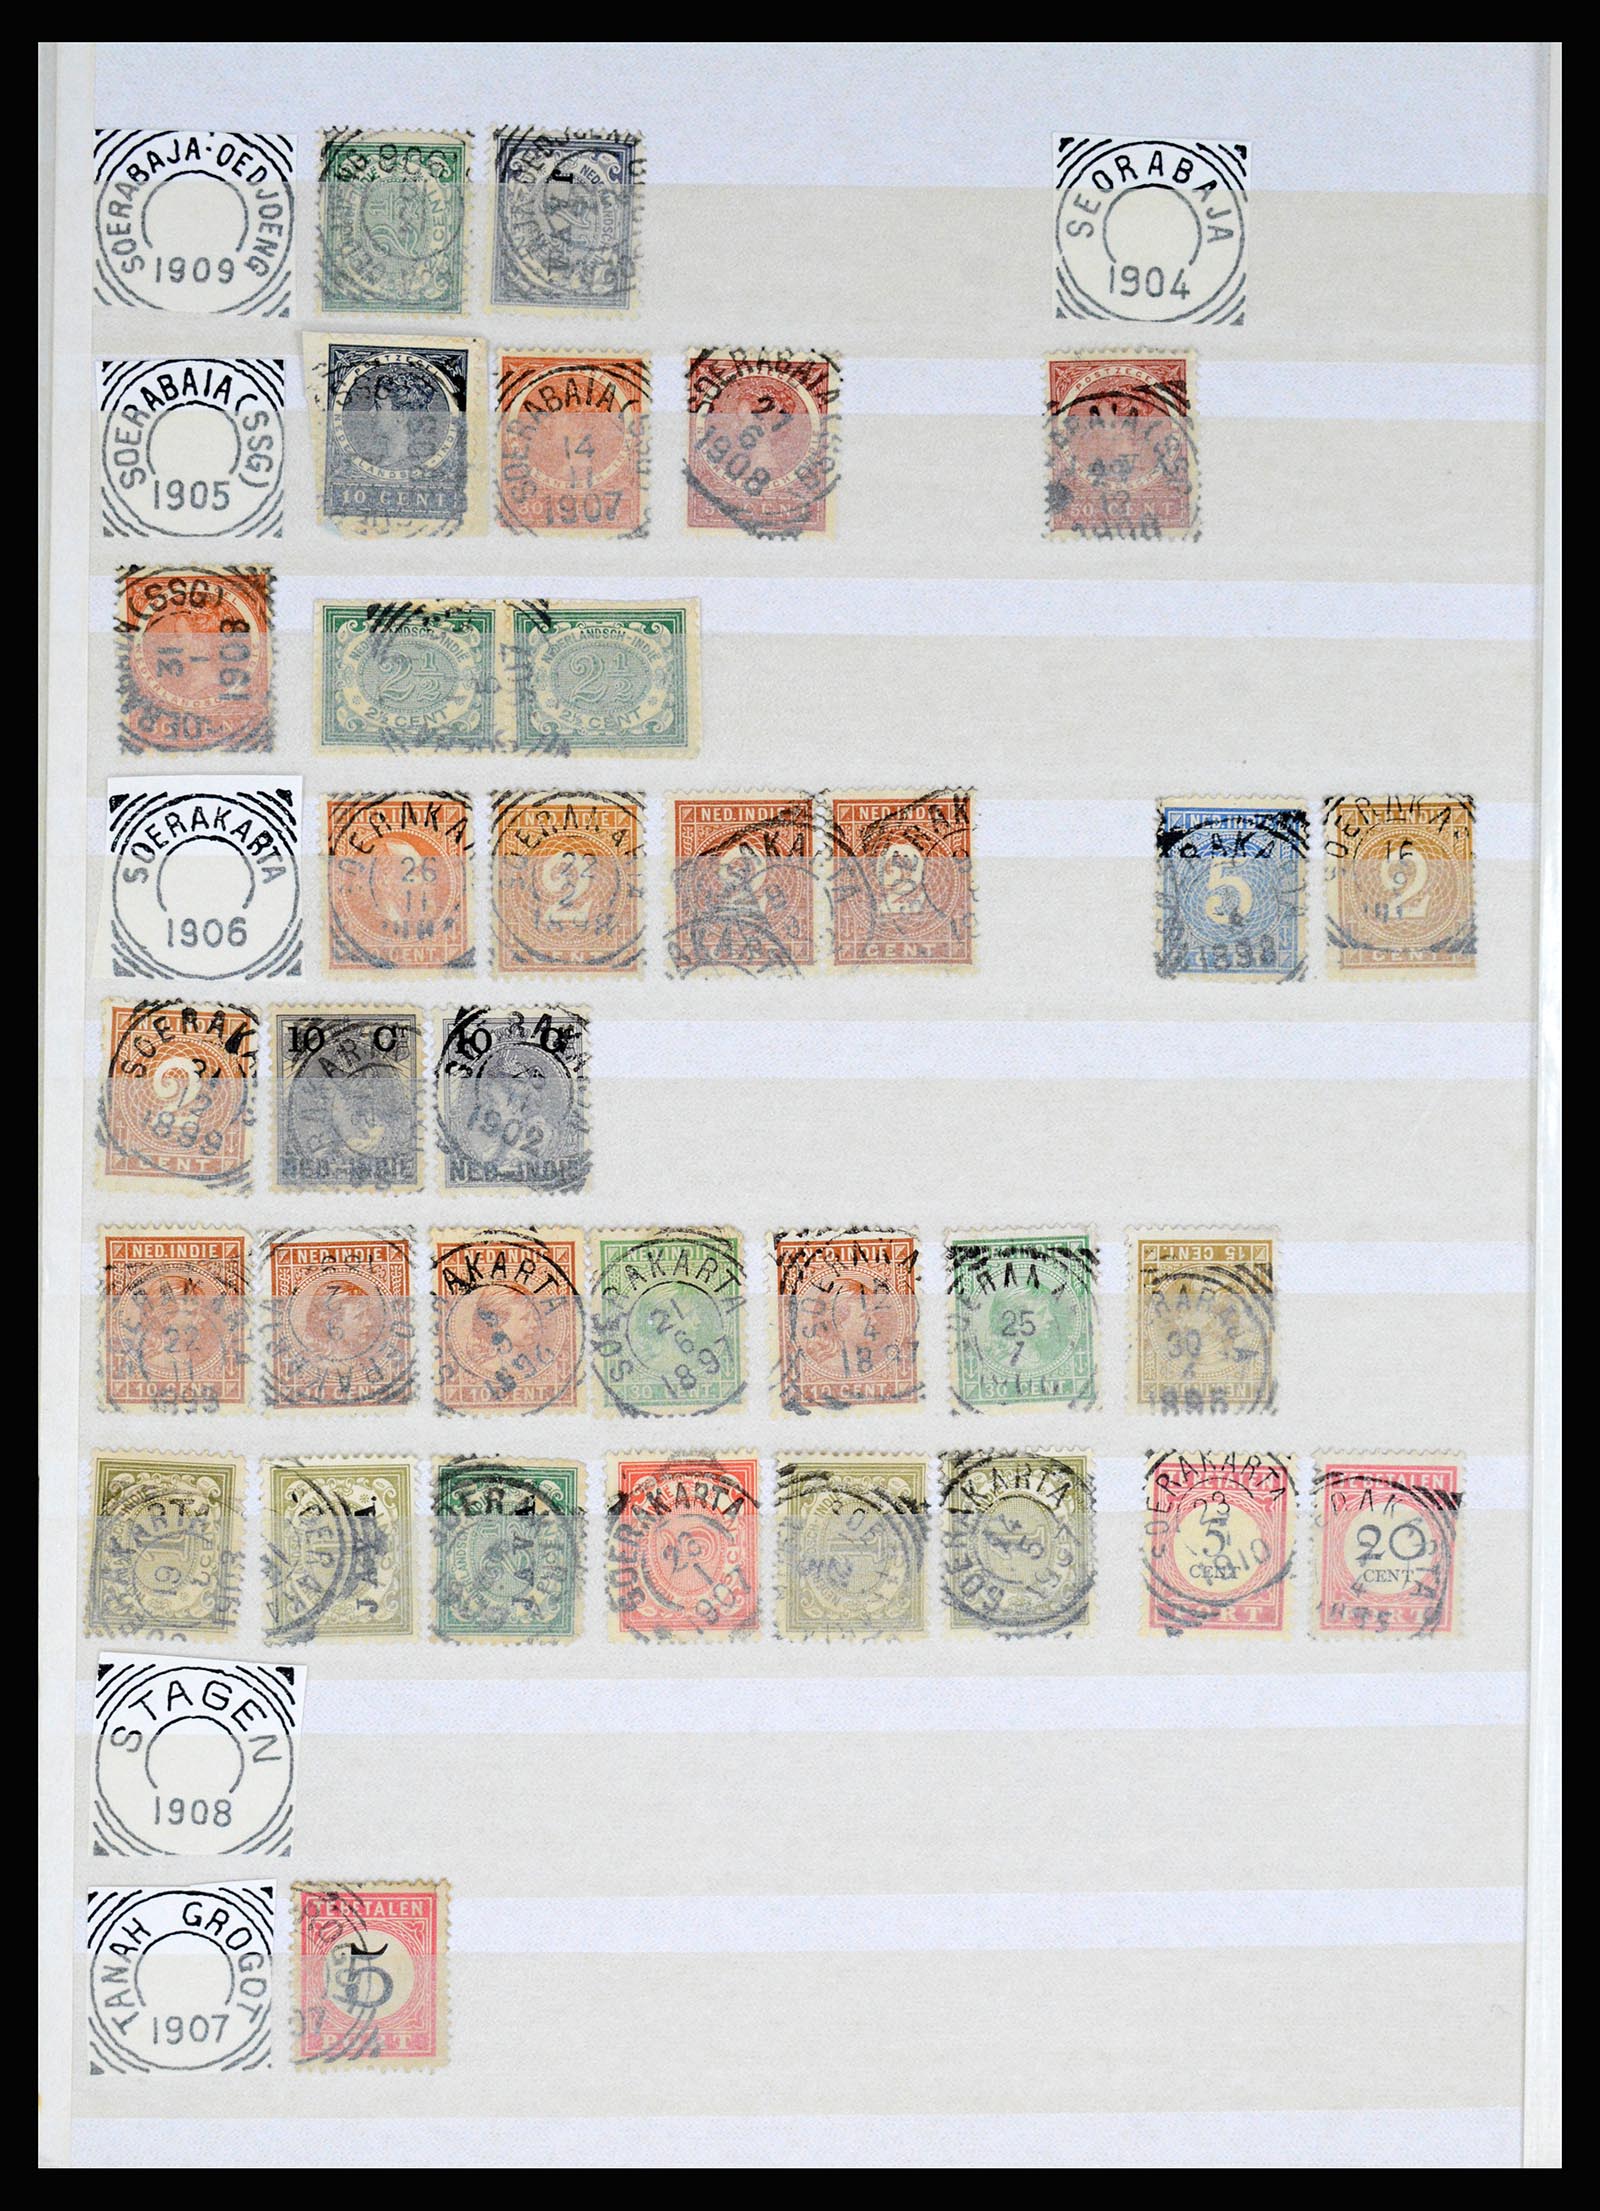 36839 093 - Stamp collection 36839 Dutch east Indies square cancels.